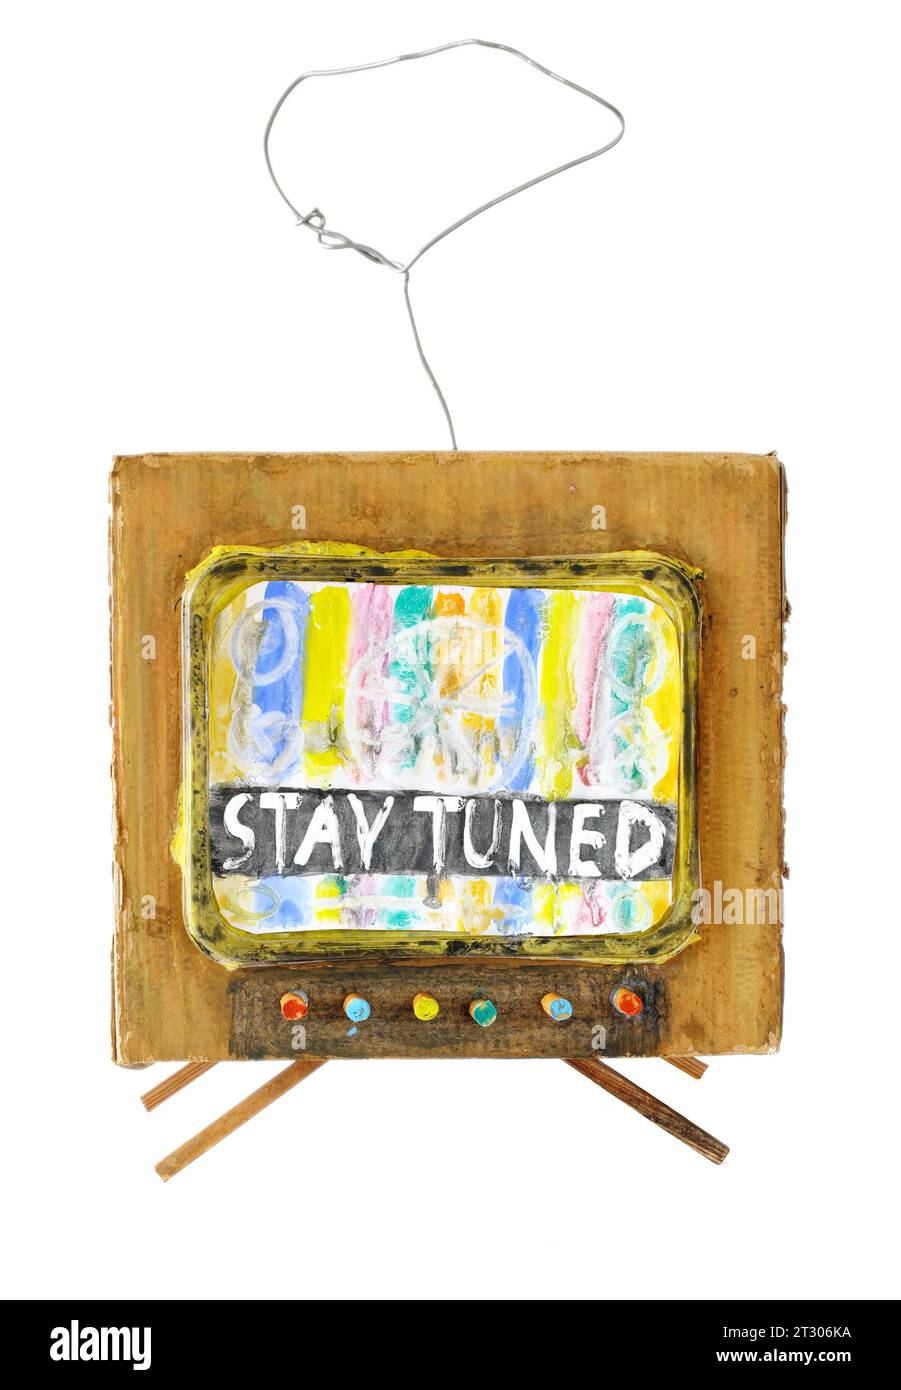 Super Grungy TV set model with test pattern and caption 'stay tuned', offline, server glitch, disturbance, website down error sign, isolated  on white Stock Photo